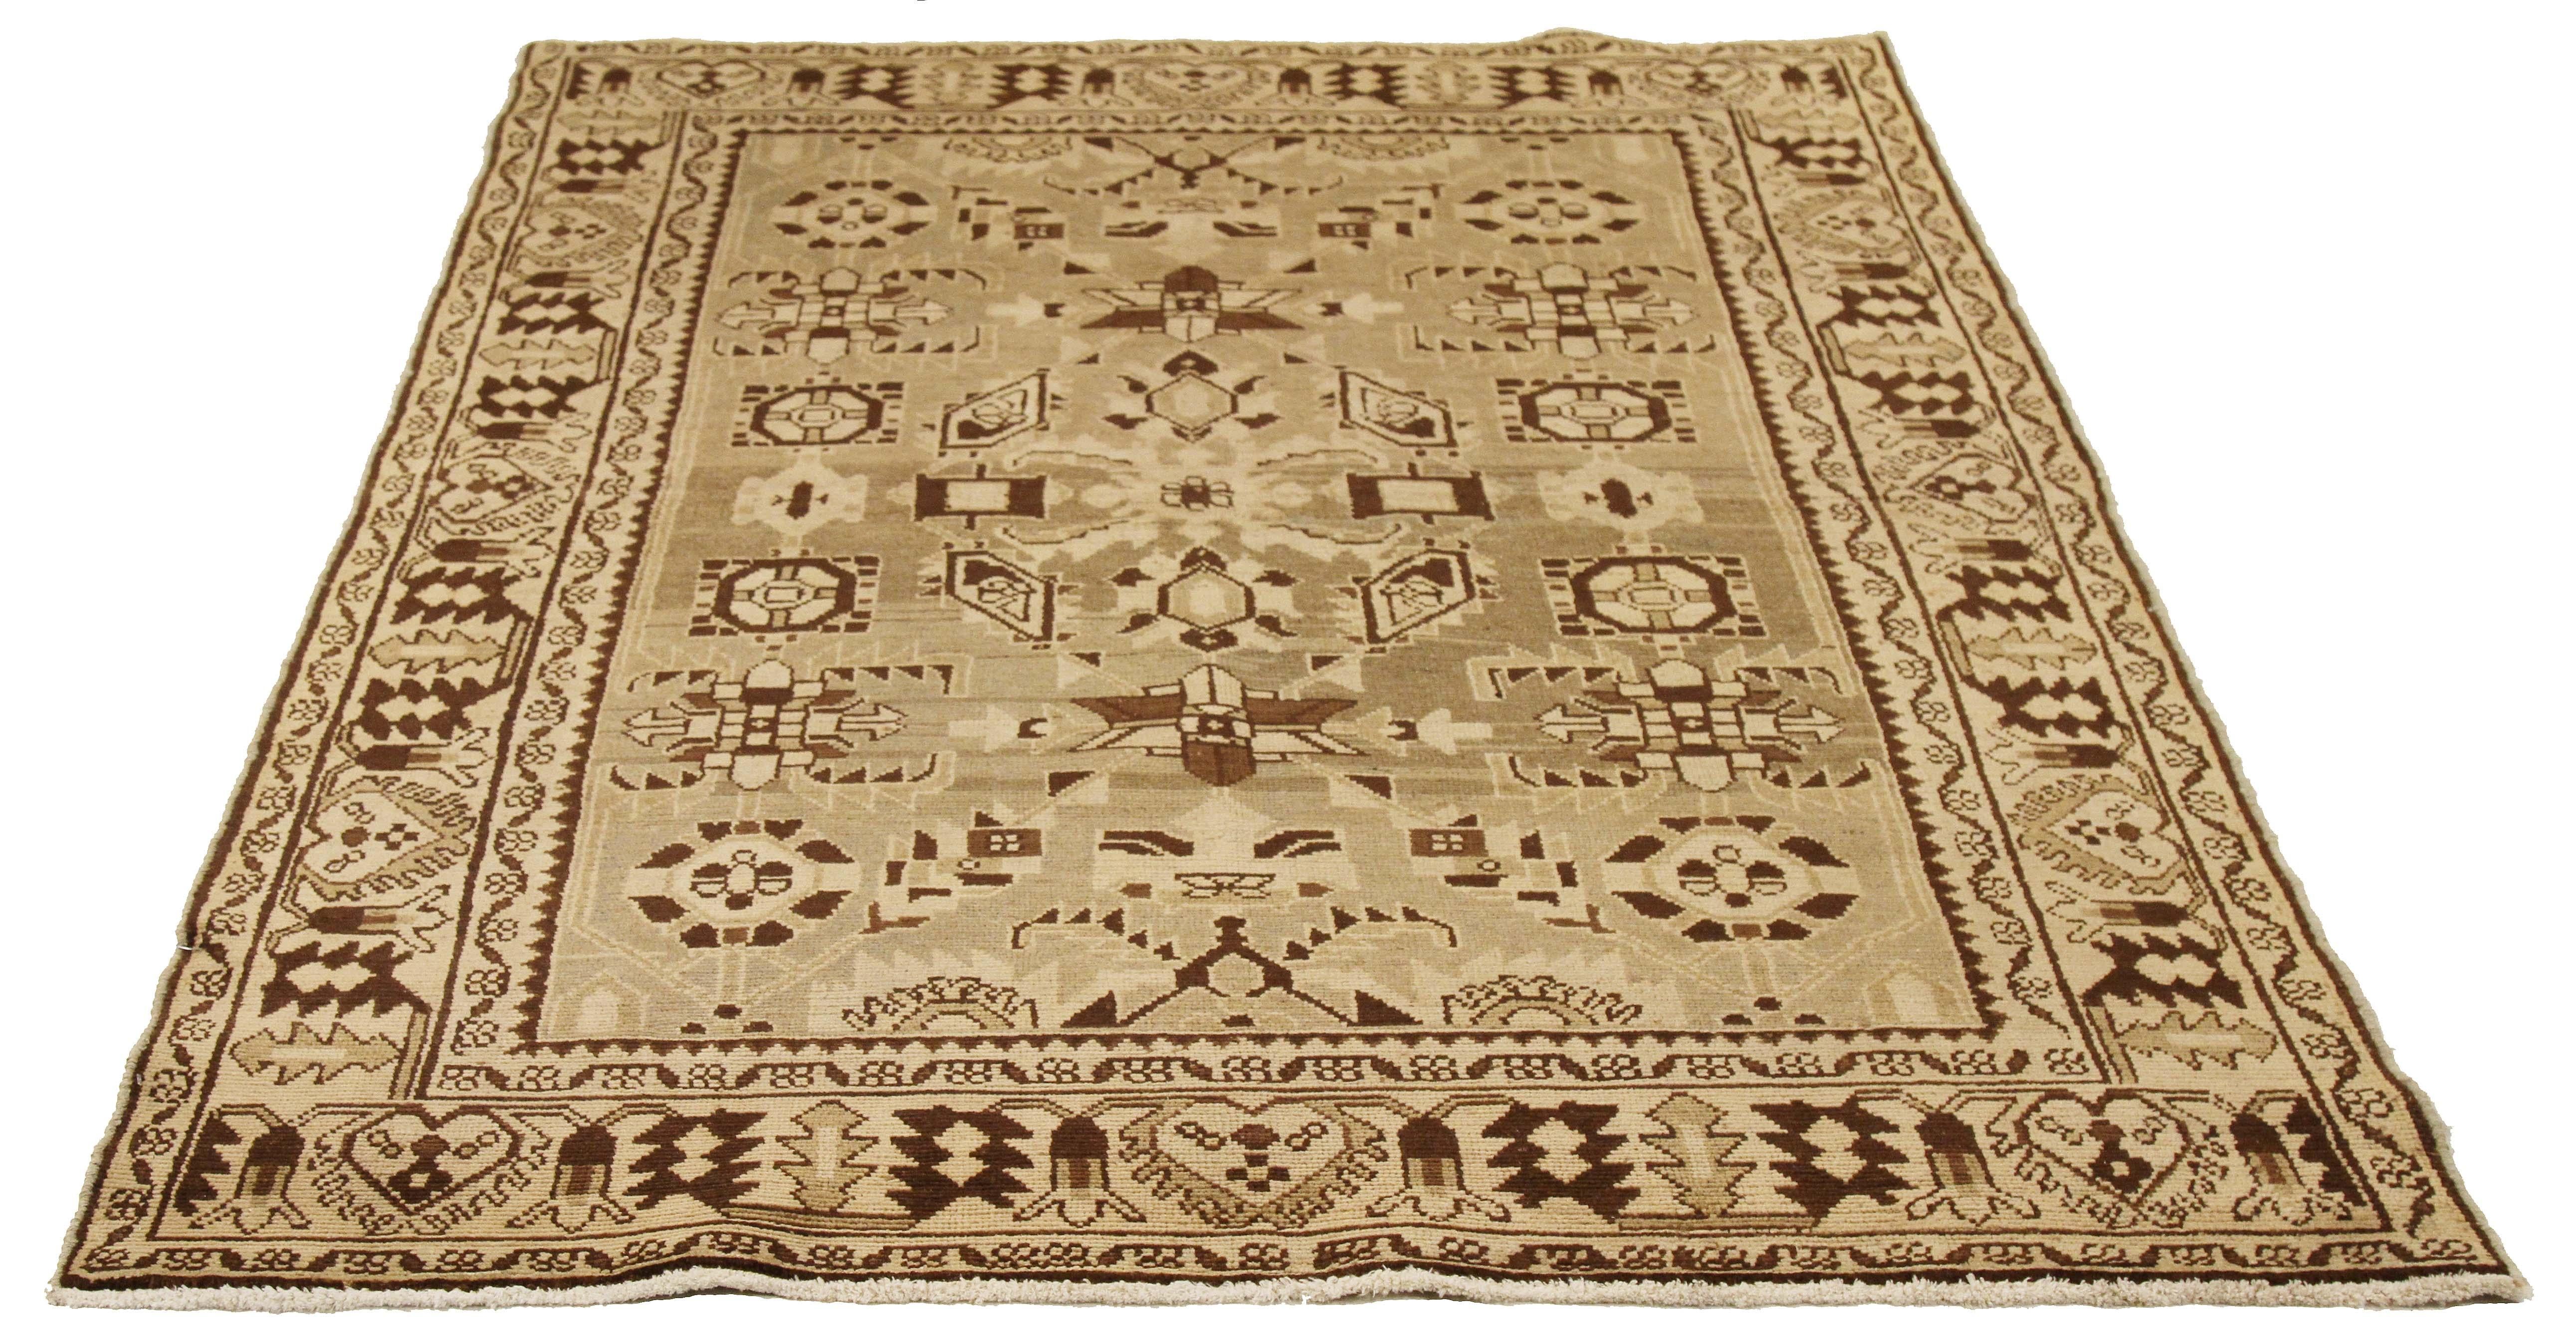 Antique Persian runner rug handwoven from the finest sheep’s wool and colored with all-natural vegetable dyes that are safe for humans and pets. It’s a traditional Malayer design featuring ivory and brown tribal details over a beige field. It’s a